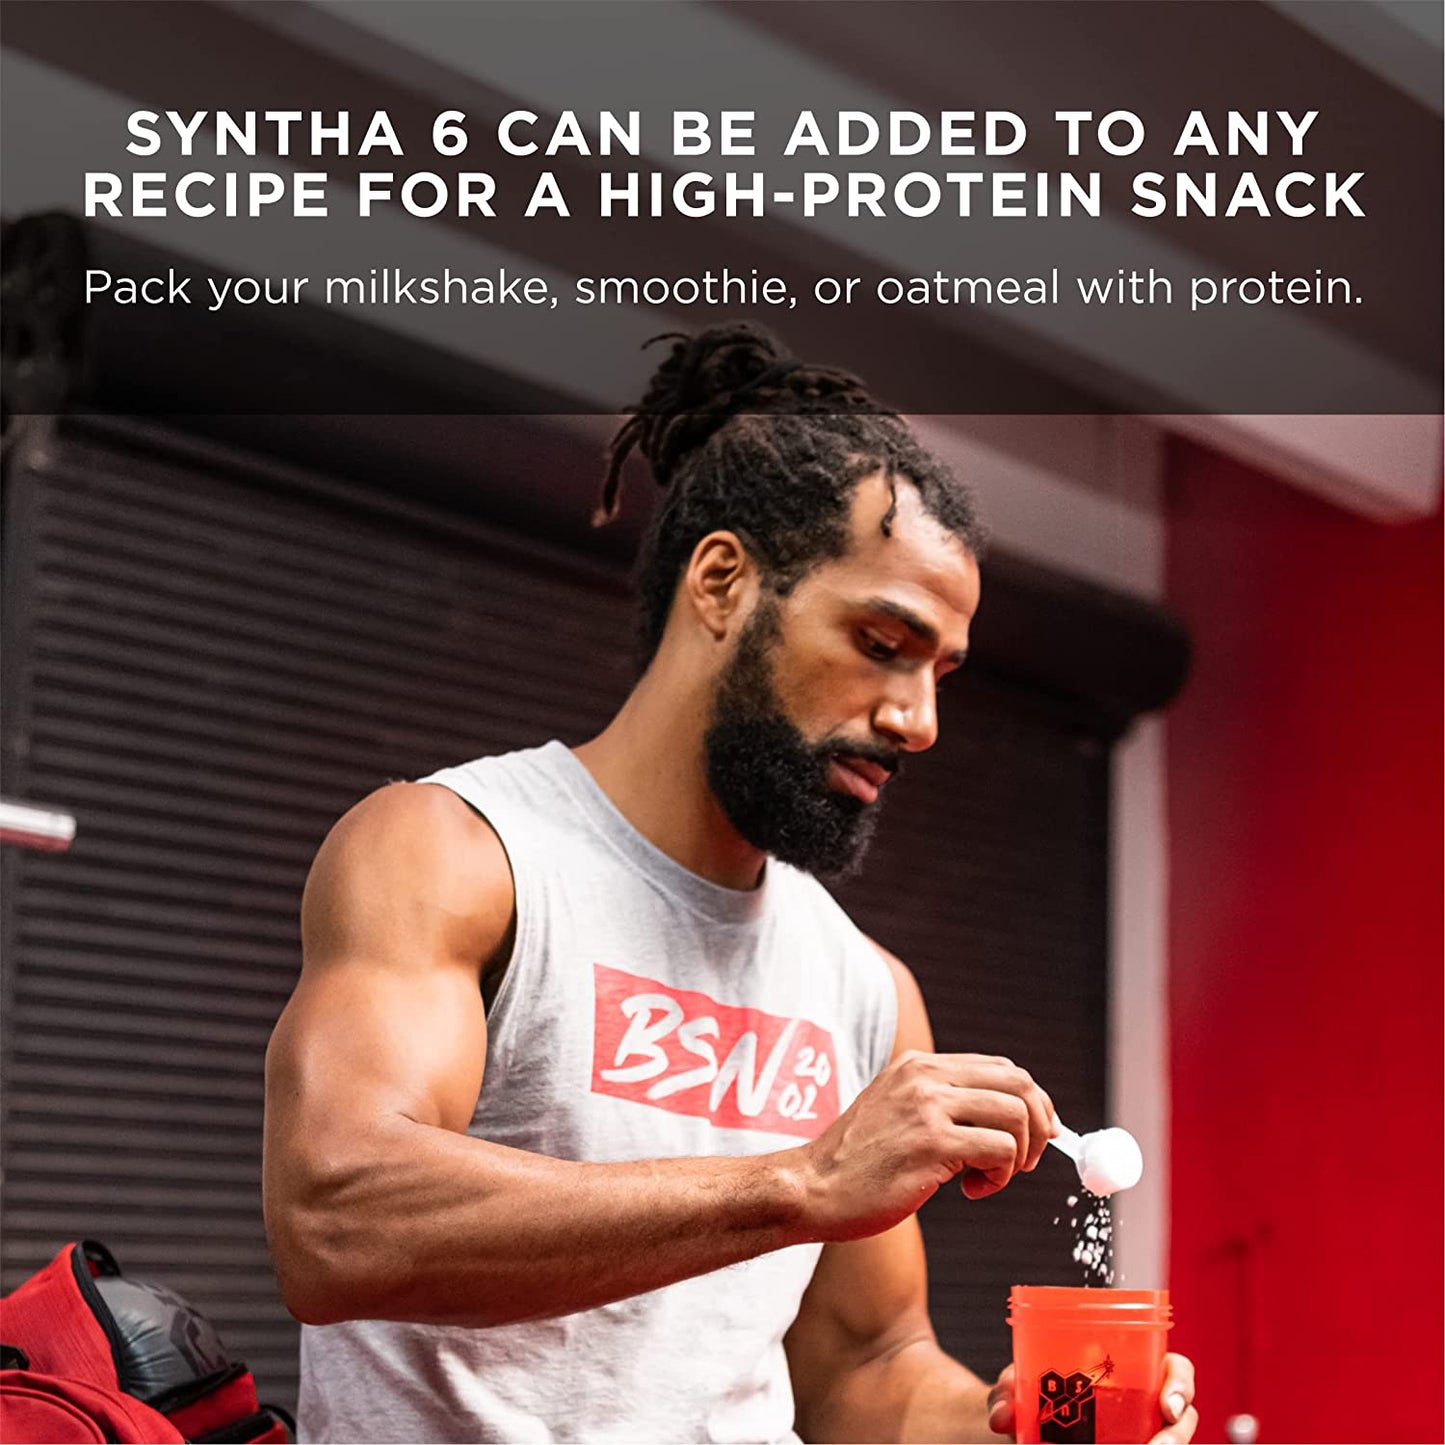 SYNTHA-6 Whey Protein Powder with Micellar Casein, Milk Protein Isolate, Chocolate Milkshake, 48 Servings (Packaging May Vary)